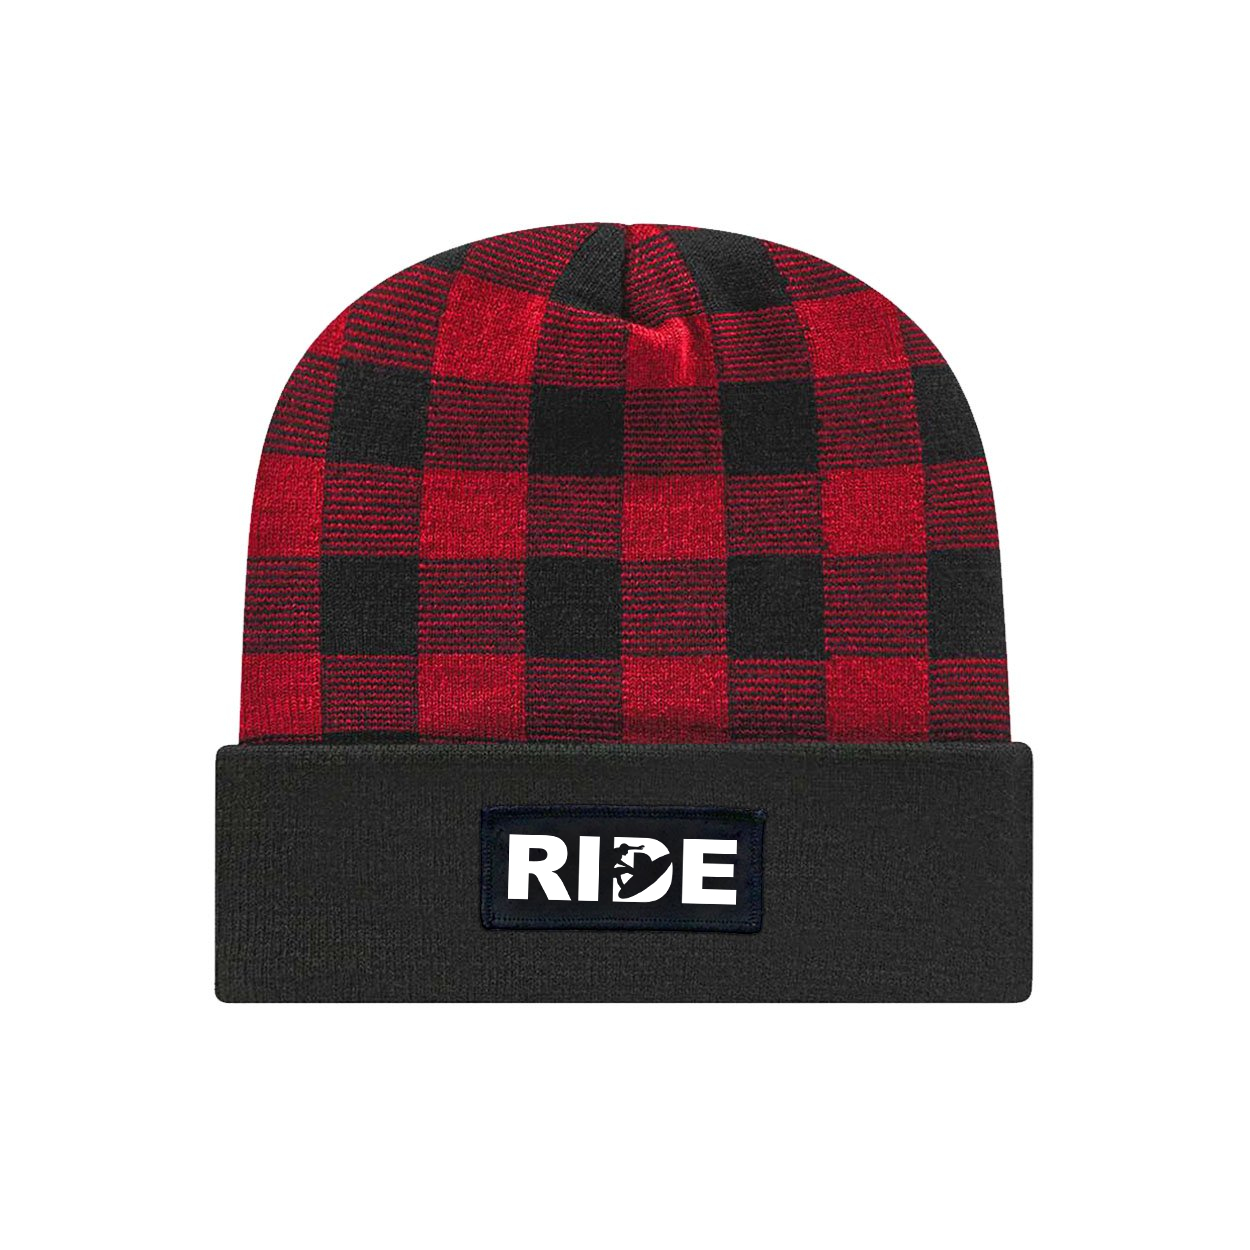 Ride Surf Logo Night Out Woven Patch Roll Up Plaid Beanie Black/True Red (White Logo)